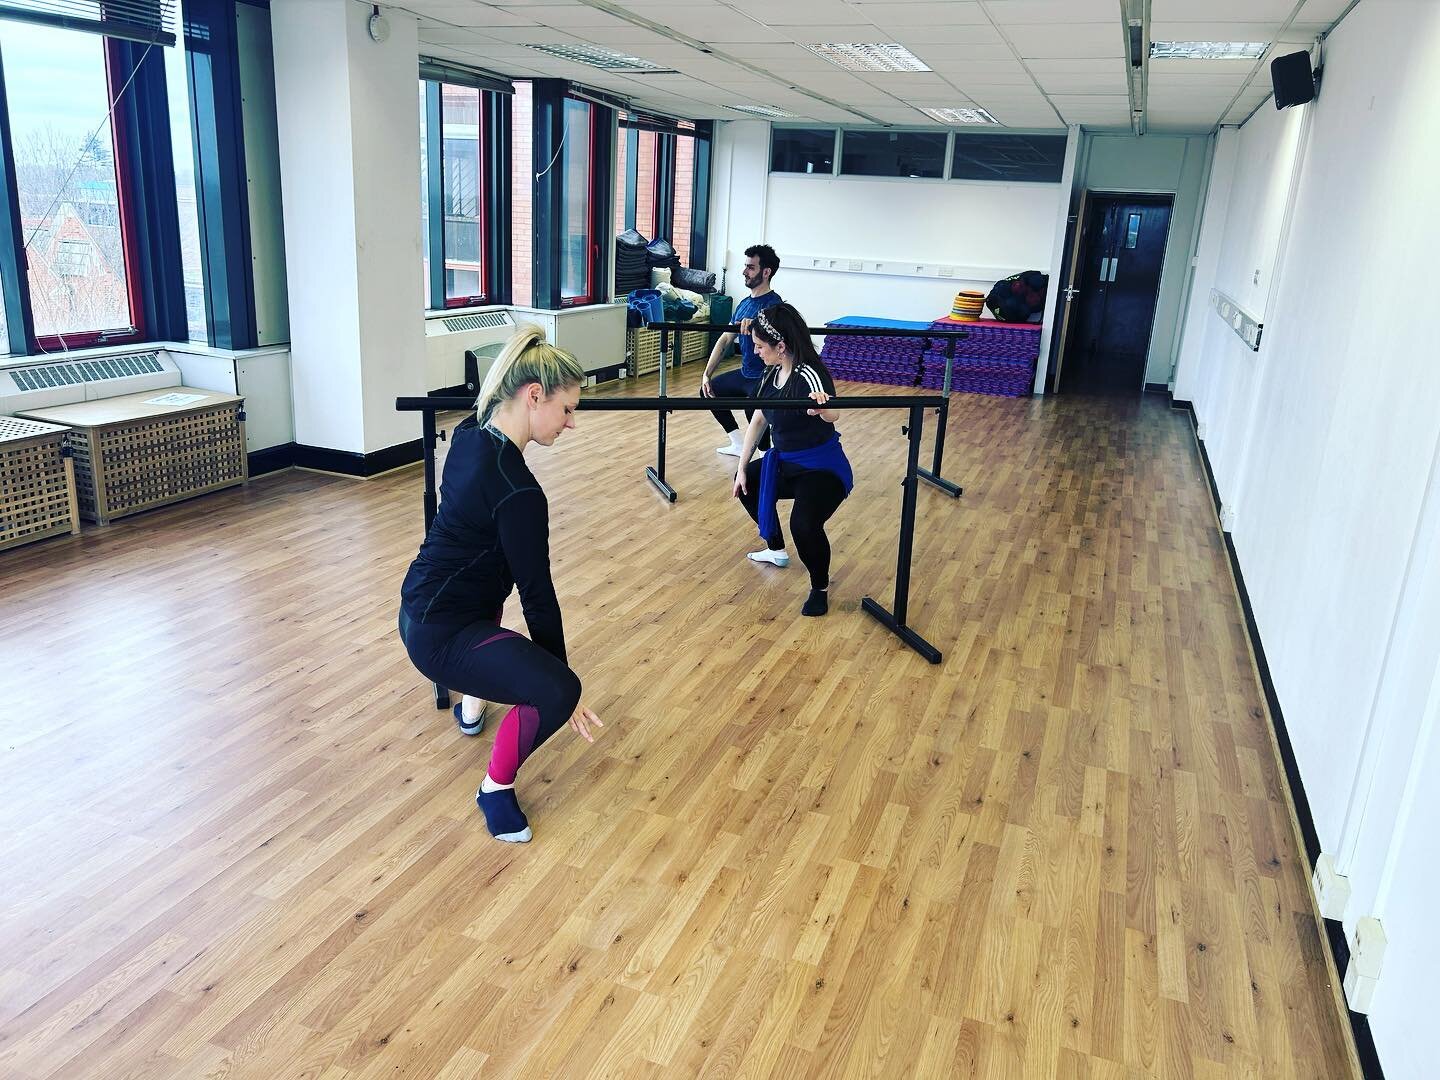 💙Adult ballet! 💙

💙 This is a gorgeous class. We love having a safe, encouraging space where adults of all experience can enjoy the art of dancing. 

💙 And we finally have ballet barres! 

💙Very excited to get back to class! Weekday classes for 